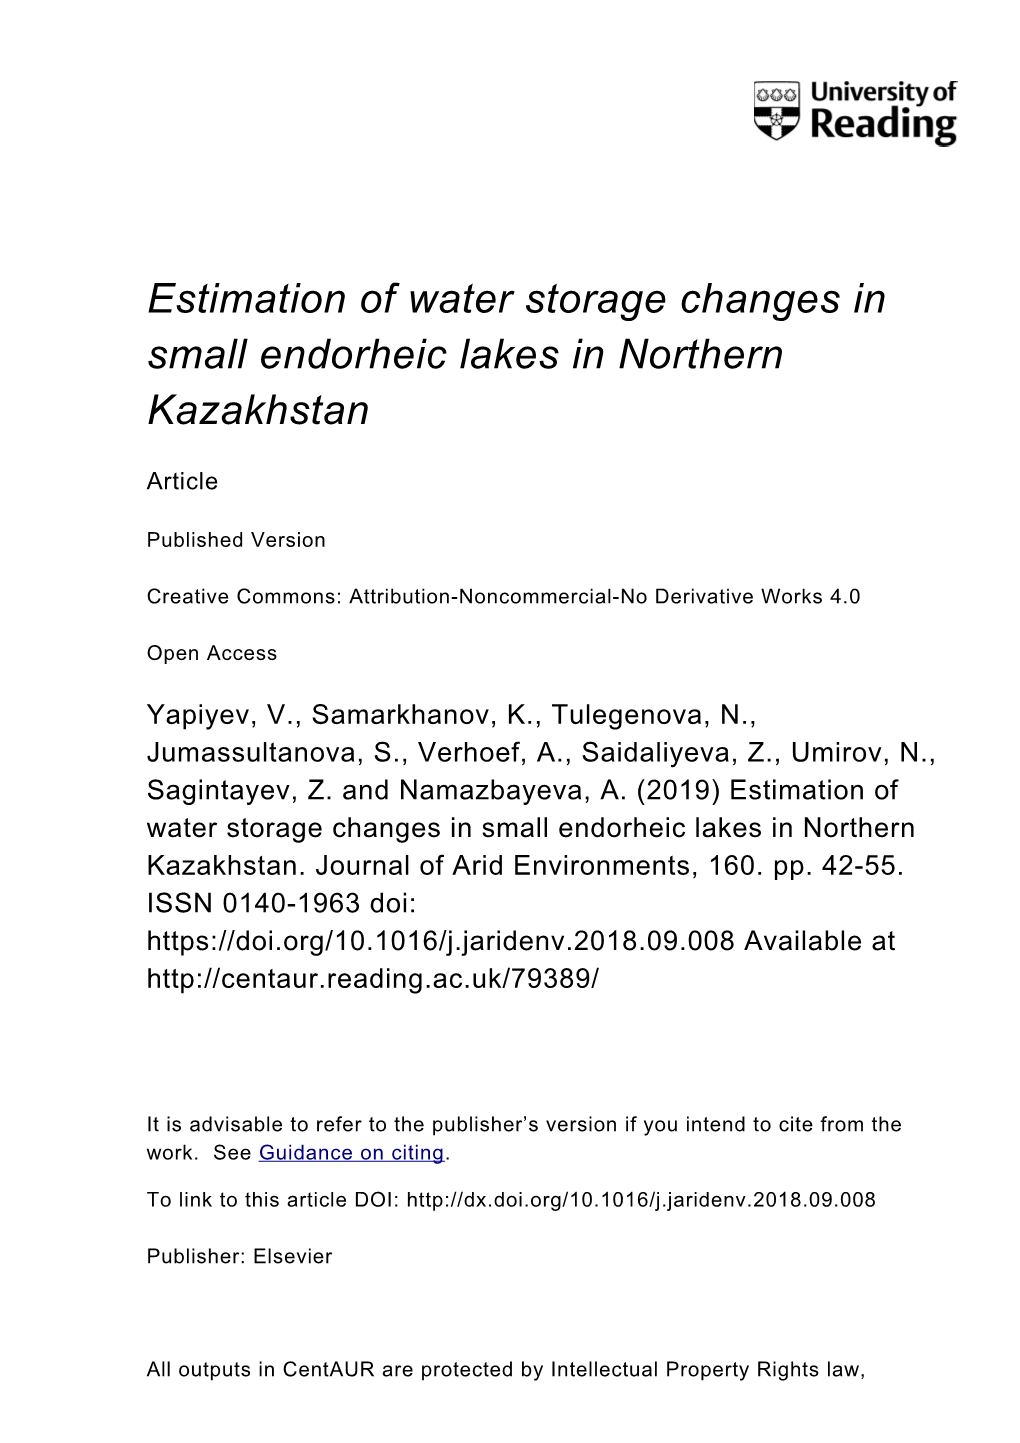 Estimation of Water Storage Changes in Small Endorheic Lakes in Northern Kazakhstan